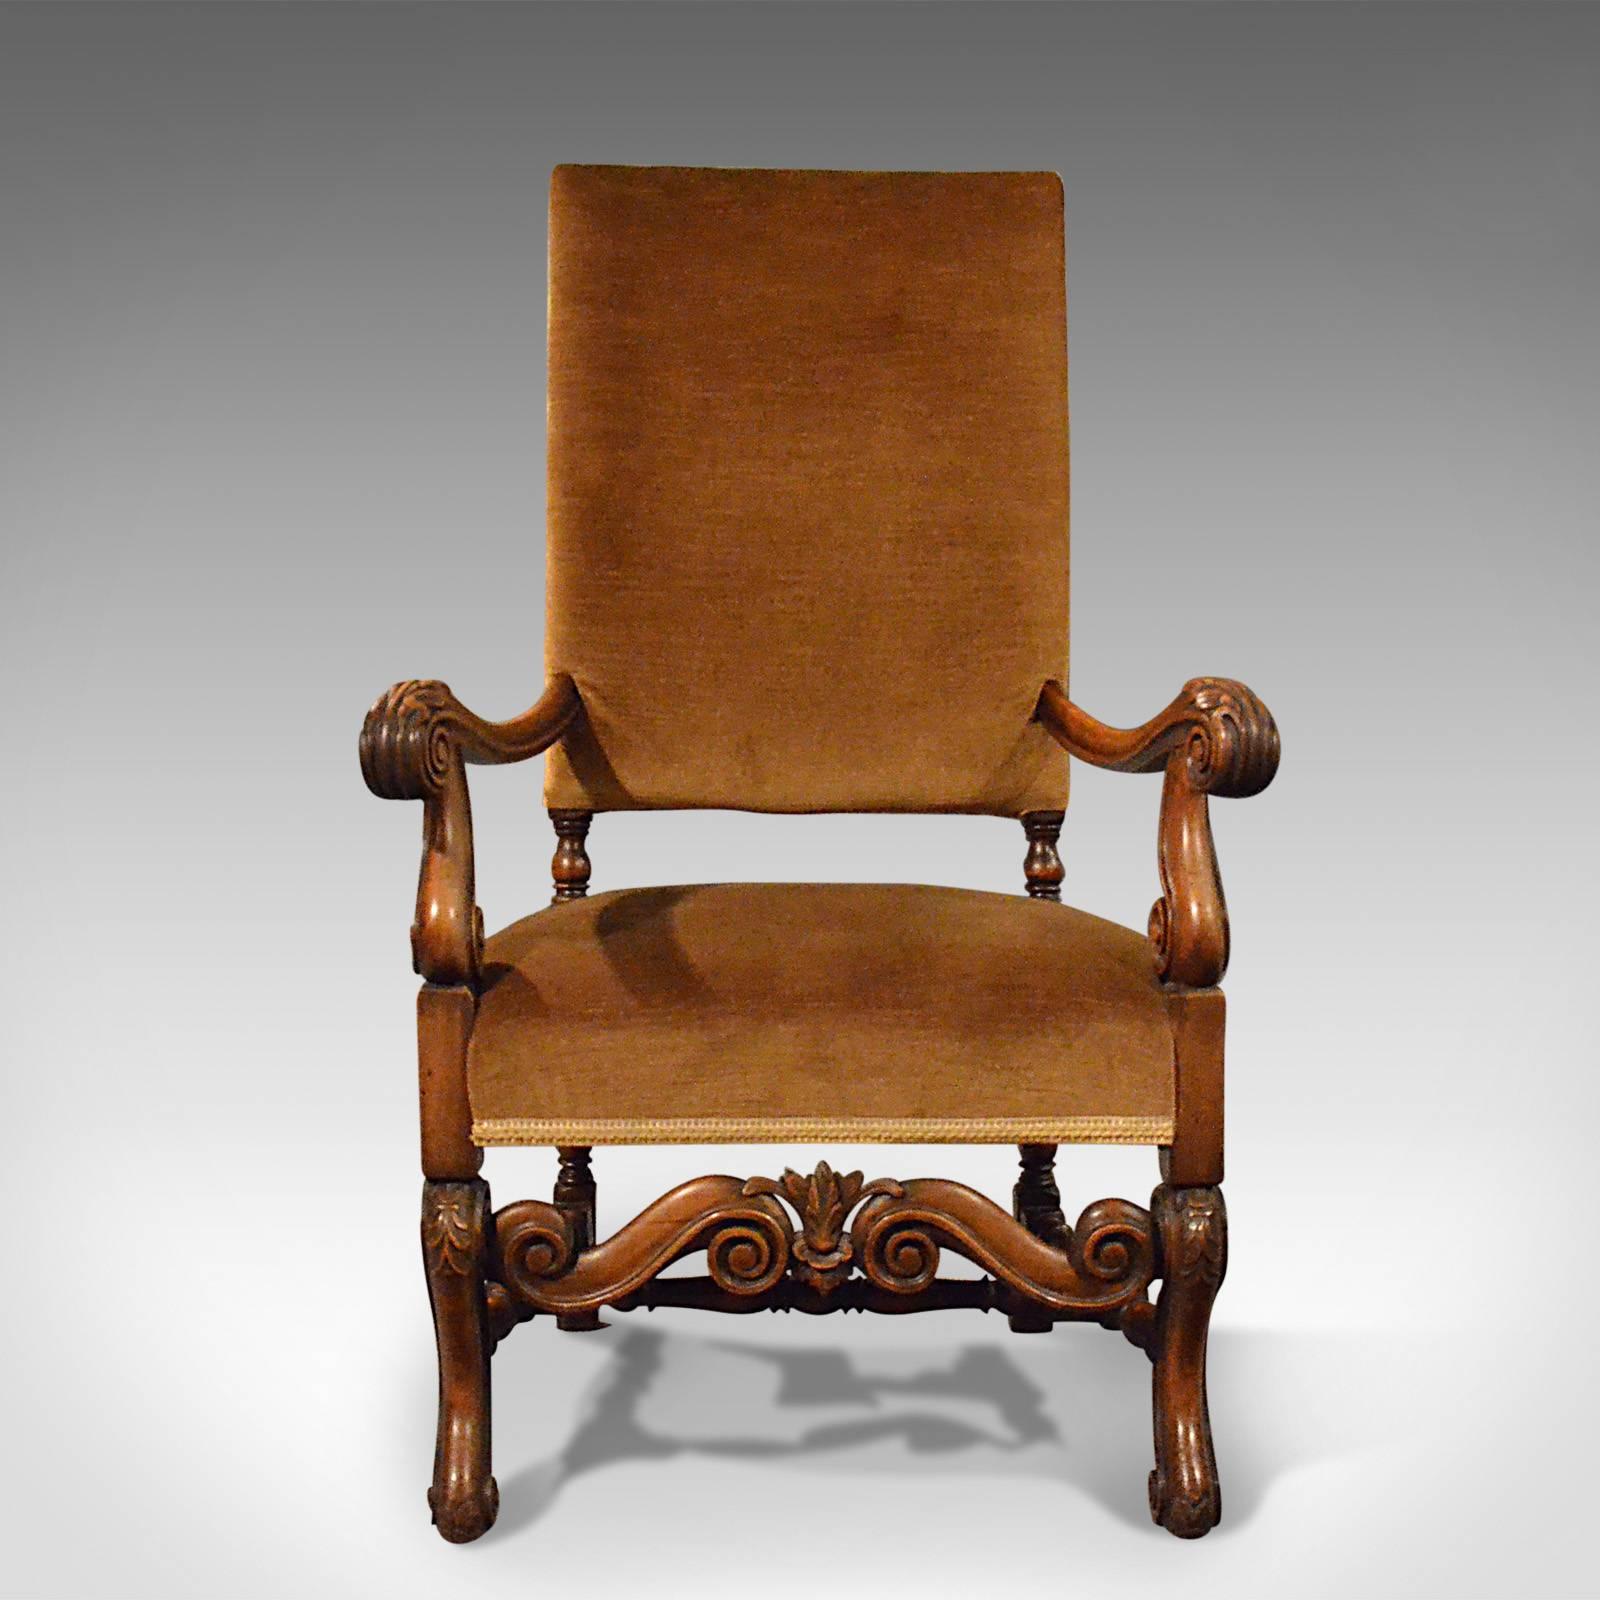 This is an antique elbow chair. An English walnut armchair dating to the Victorian era, circa 1880. 

A superior late 19th century chair presented in excellent antique condition
Stunning walnut frame presenting good colour and a desirable aged